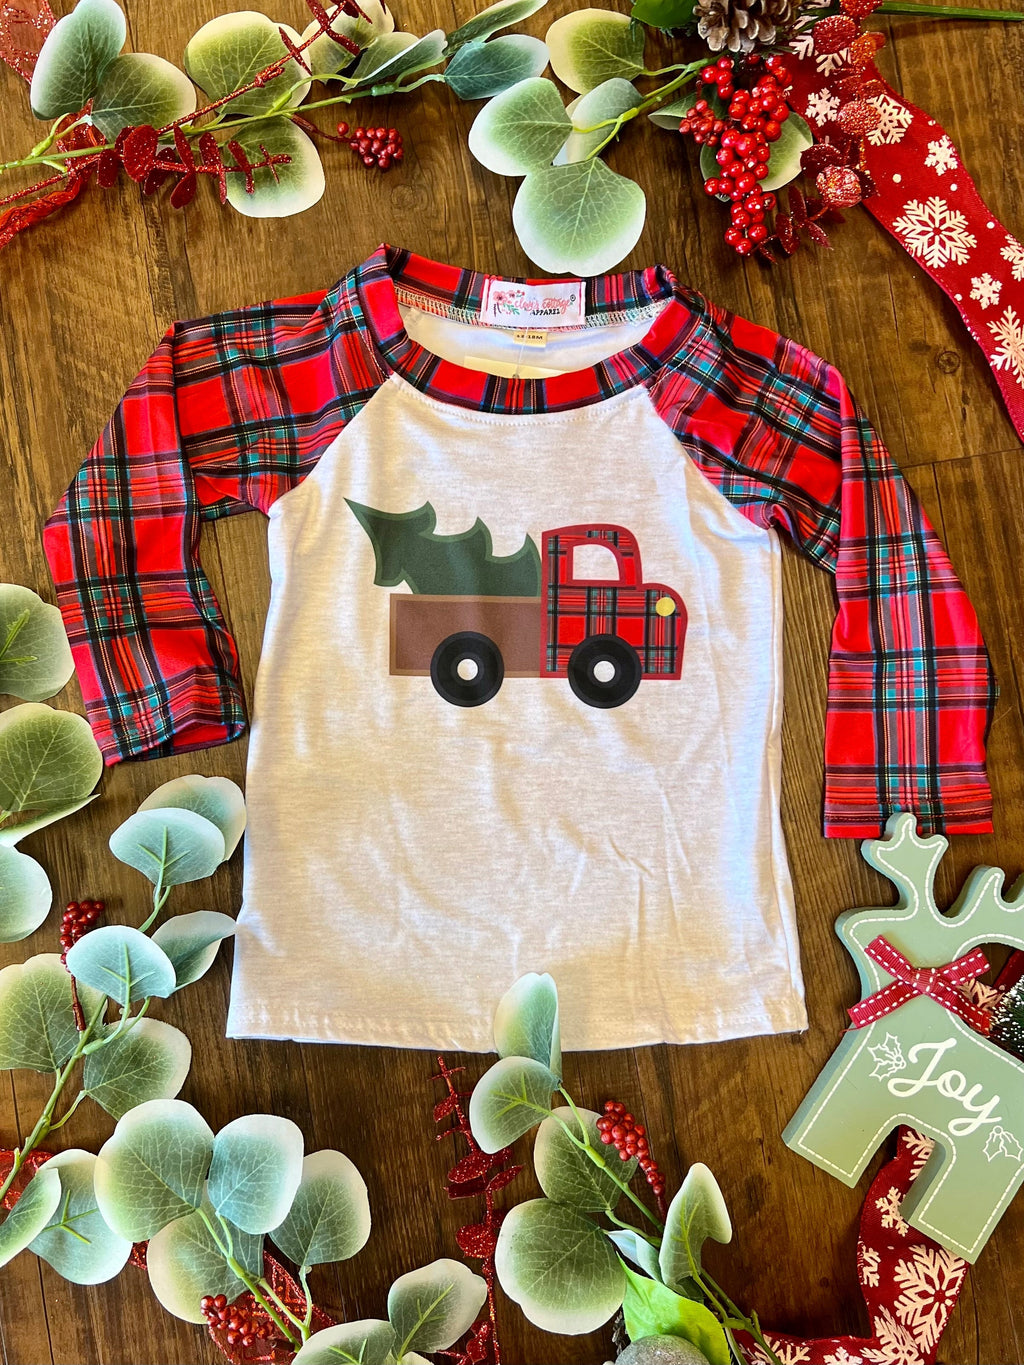 This KIDS Plaid Vintage Truck Raglan is perfect for creating fun, festive holiday memories! Featuring an adorable vintage truck with a Christmas tree, this ultra-soft raglan in white, with red plaid trim and red plain sleeves, is sure to bring the cheer. Yeehaw! 95% Cotton 5% Spandex.